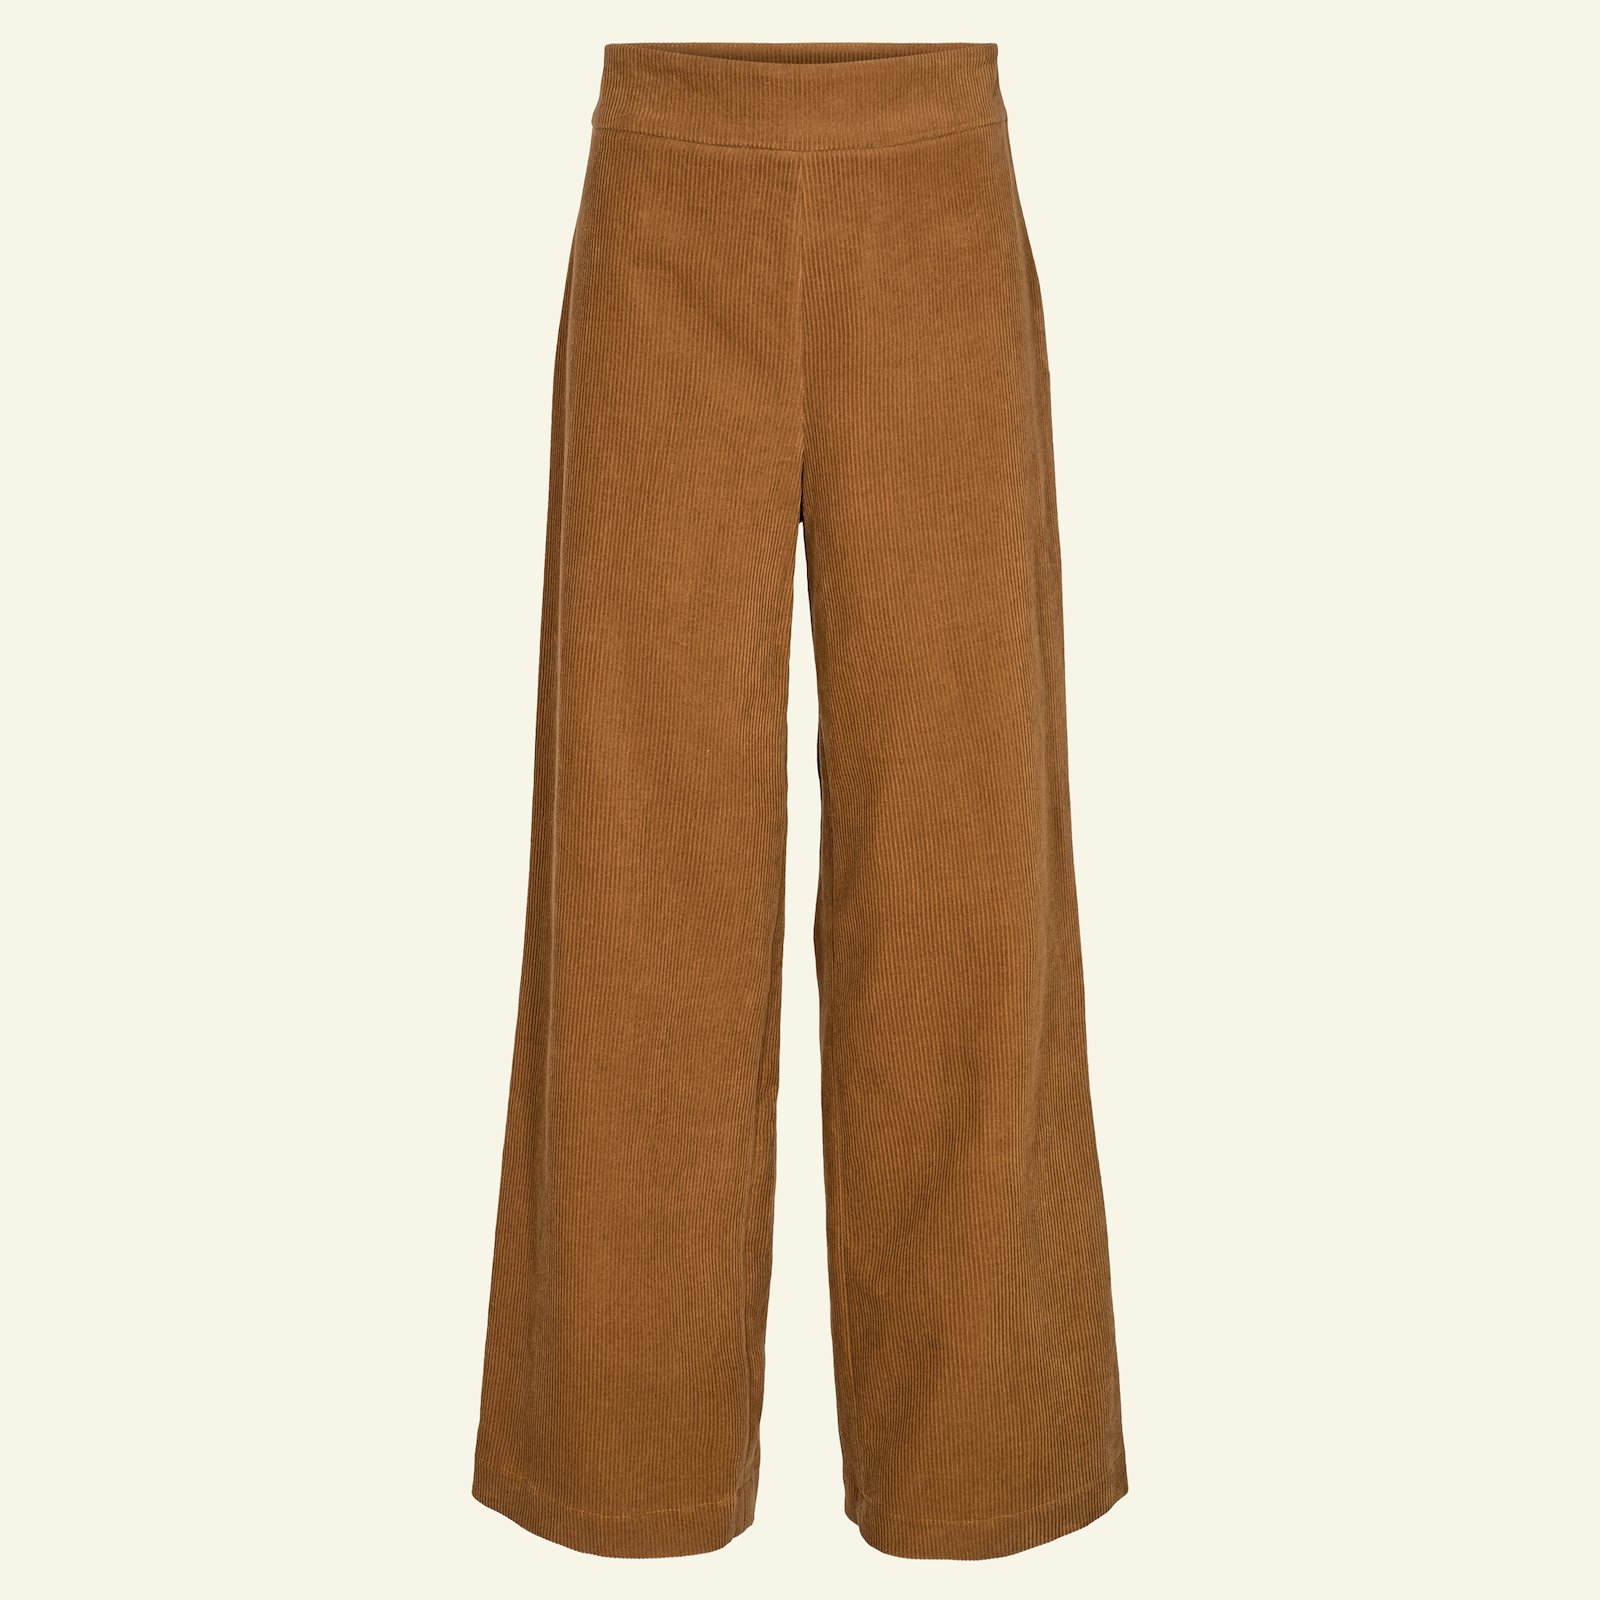 Highwaist and wide legs trousers, 40/12 p20052_430810_sskit